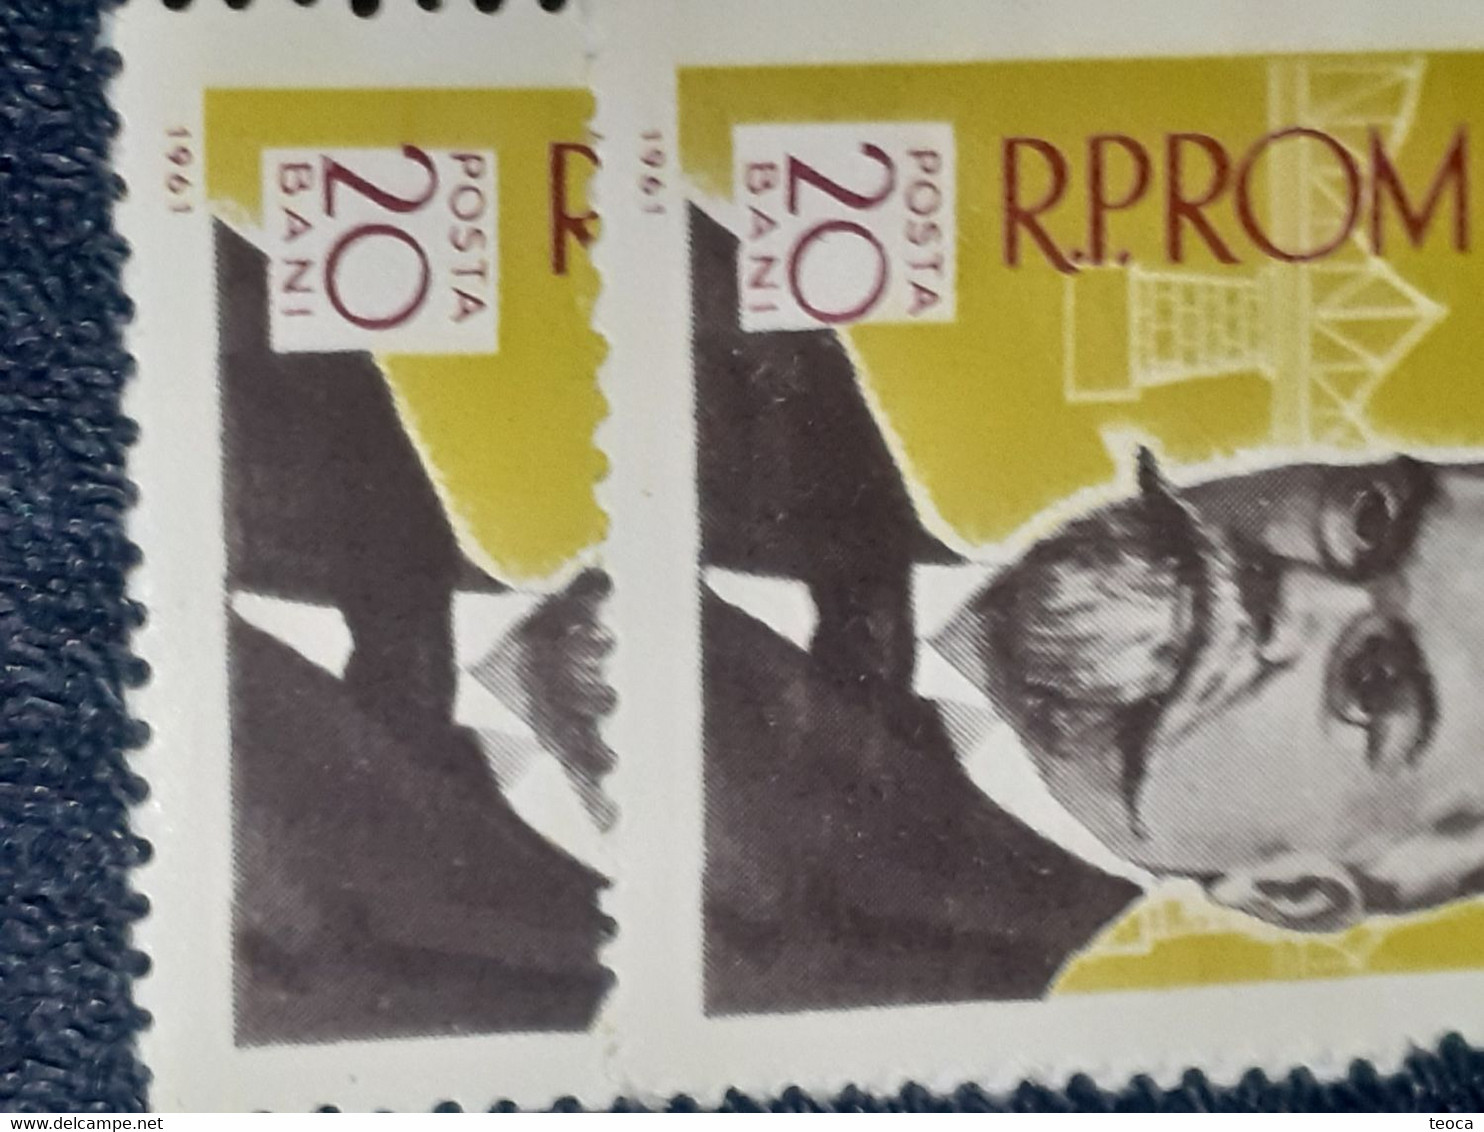 Errors Romania 1961 # Mi 1959 Anghel Saligny, Printed With Numbers And Letter Shifted Left And Right See Image - Errors, Freaks & Oddities (EFO)